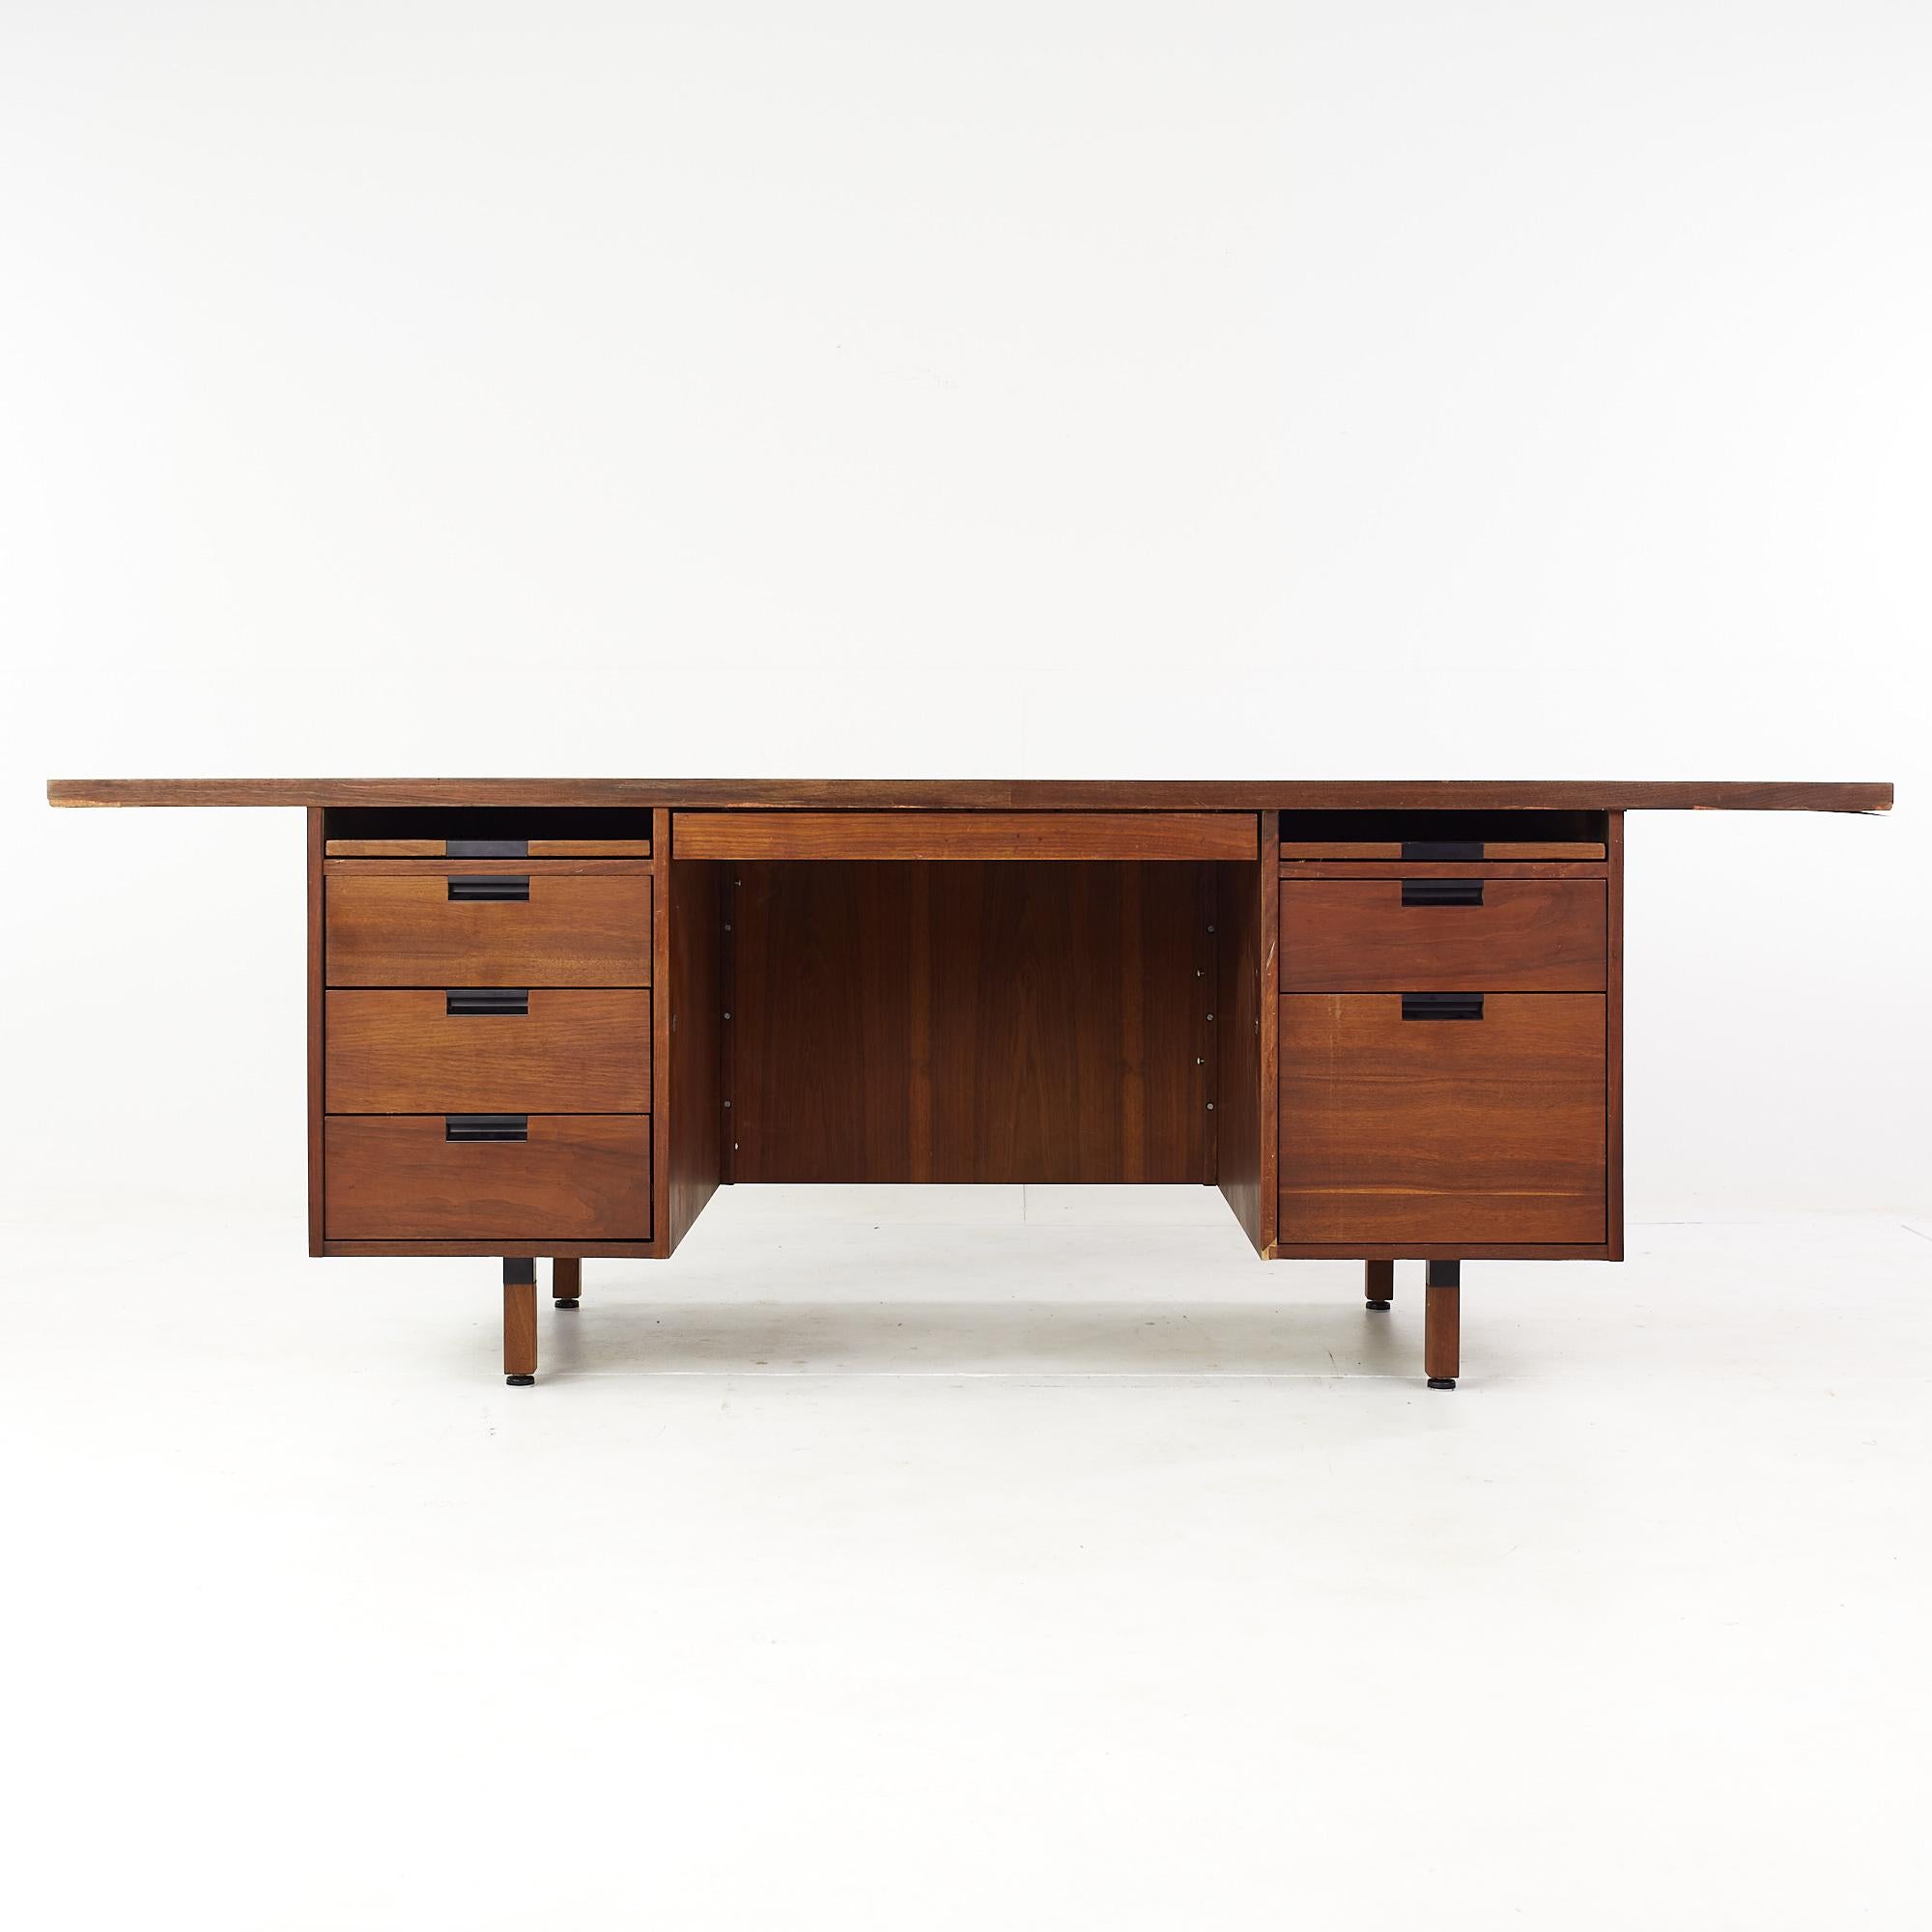 Jens Risom style mid century walnut semi circle executive desk.

This desk measures: 88 wide x 44 deep x 30 high, with a chair clearance of 28 inches.

All pieces of furniture can be had in what we call restored vintage condition. That means the